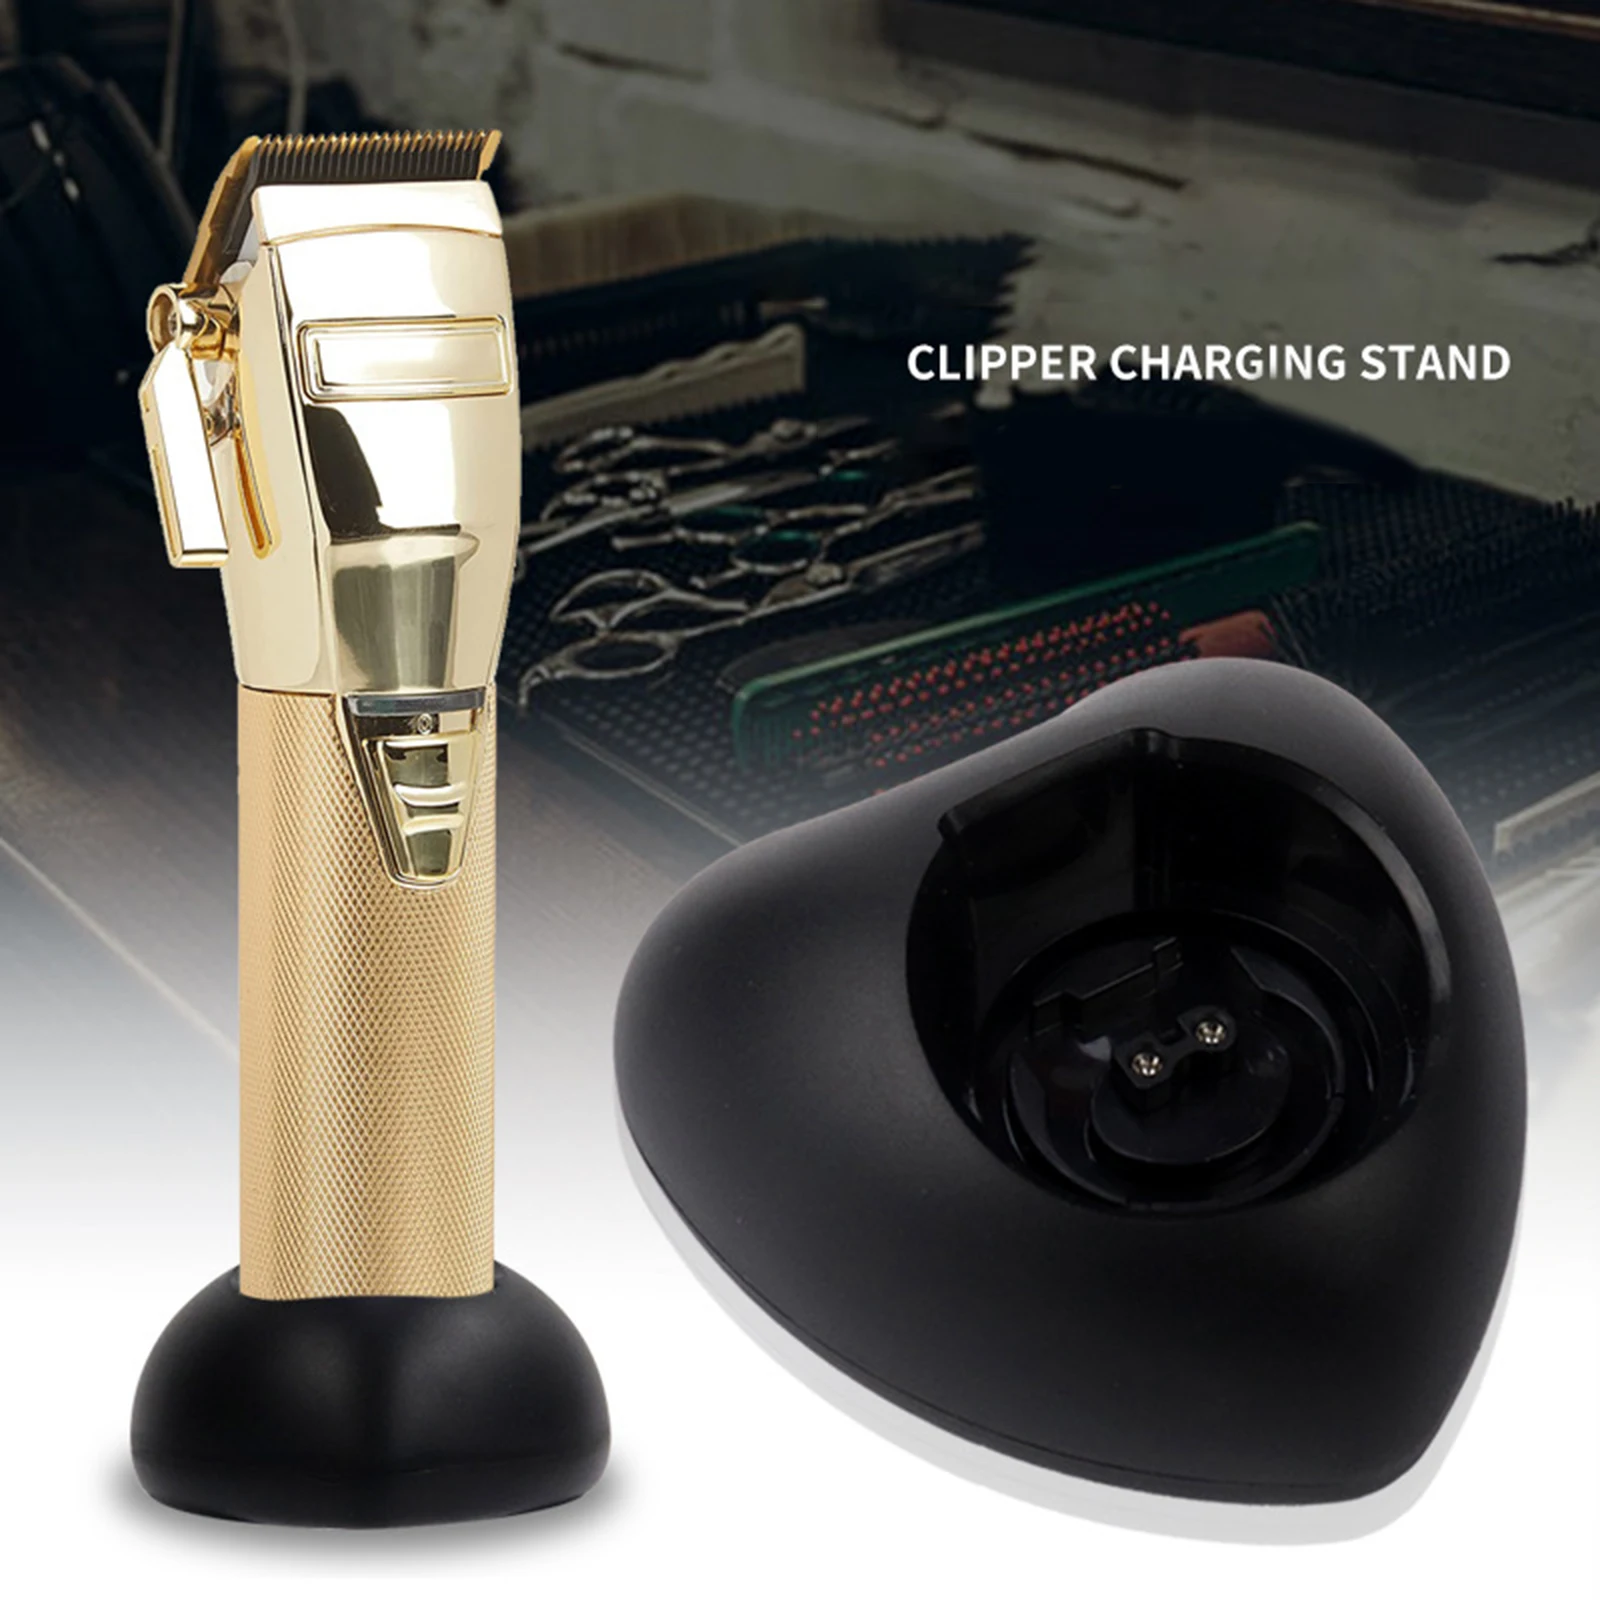 

Electric Hair Clipper Charging Stand Cordless Vertical Charging Dock Station for 8700GCN / 787GCN Shaver for Home Salon